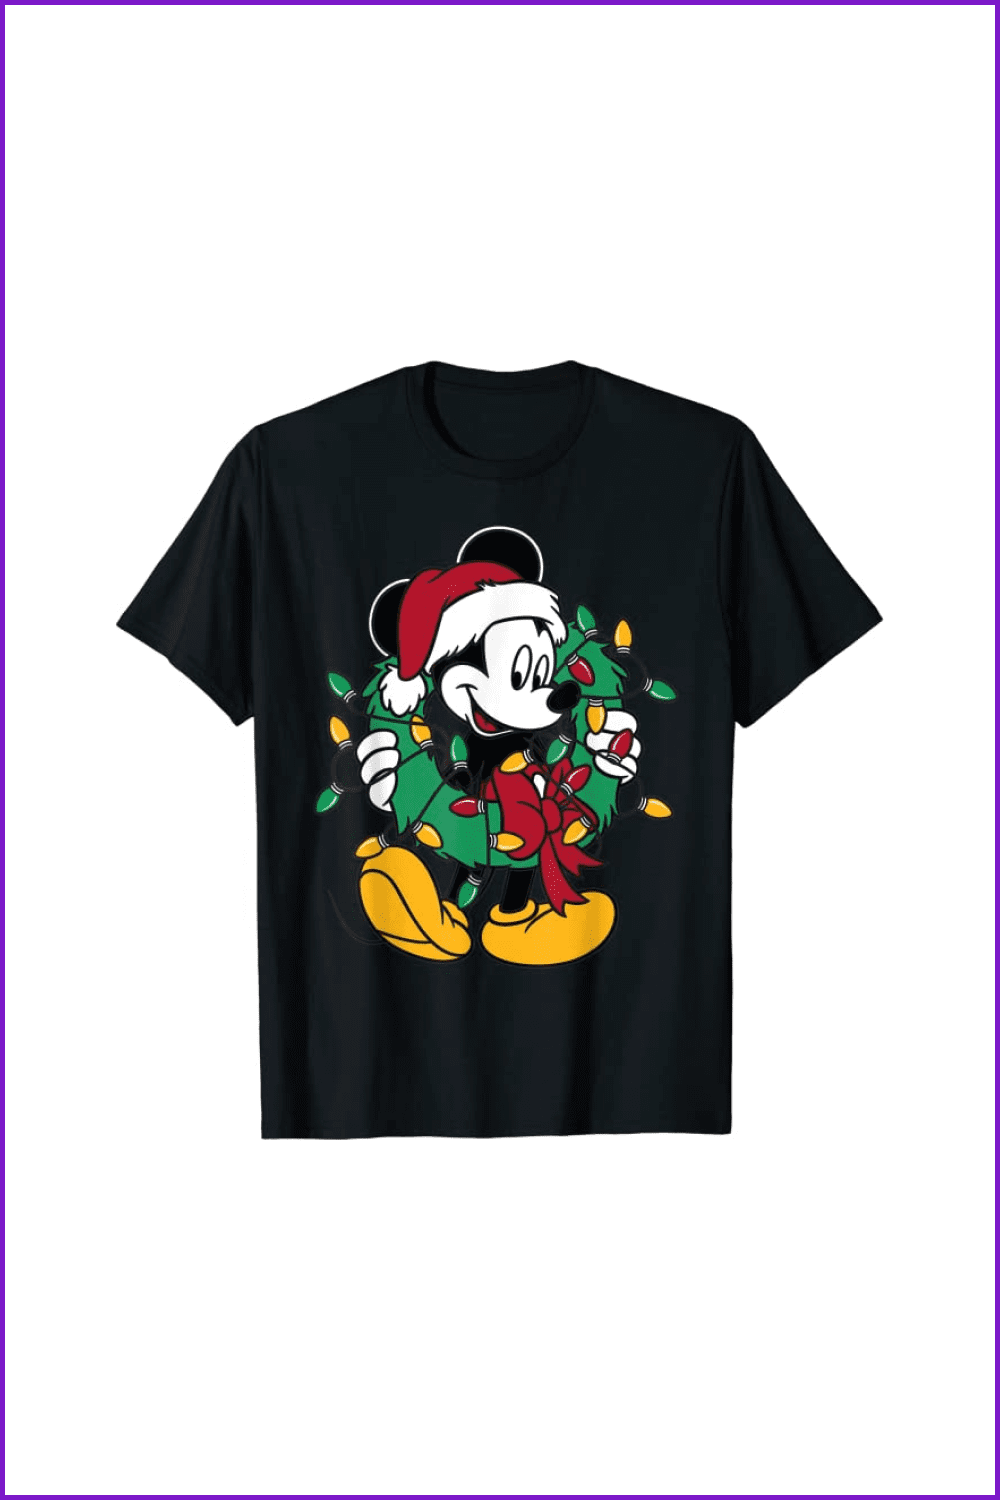 Black t-shirt with a Mickey Mouse in a Christmas hat with a green wreath and lights.